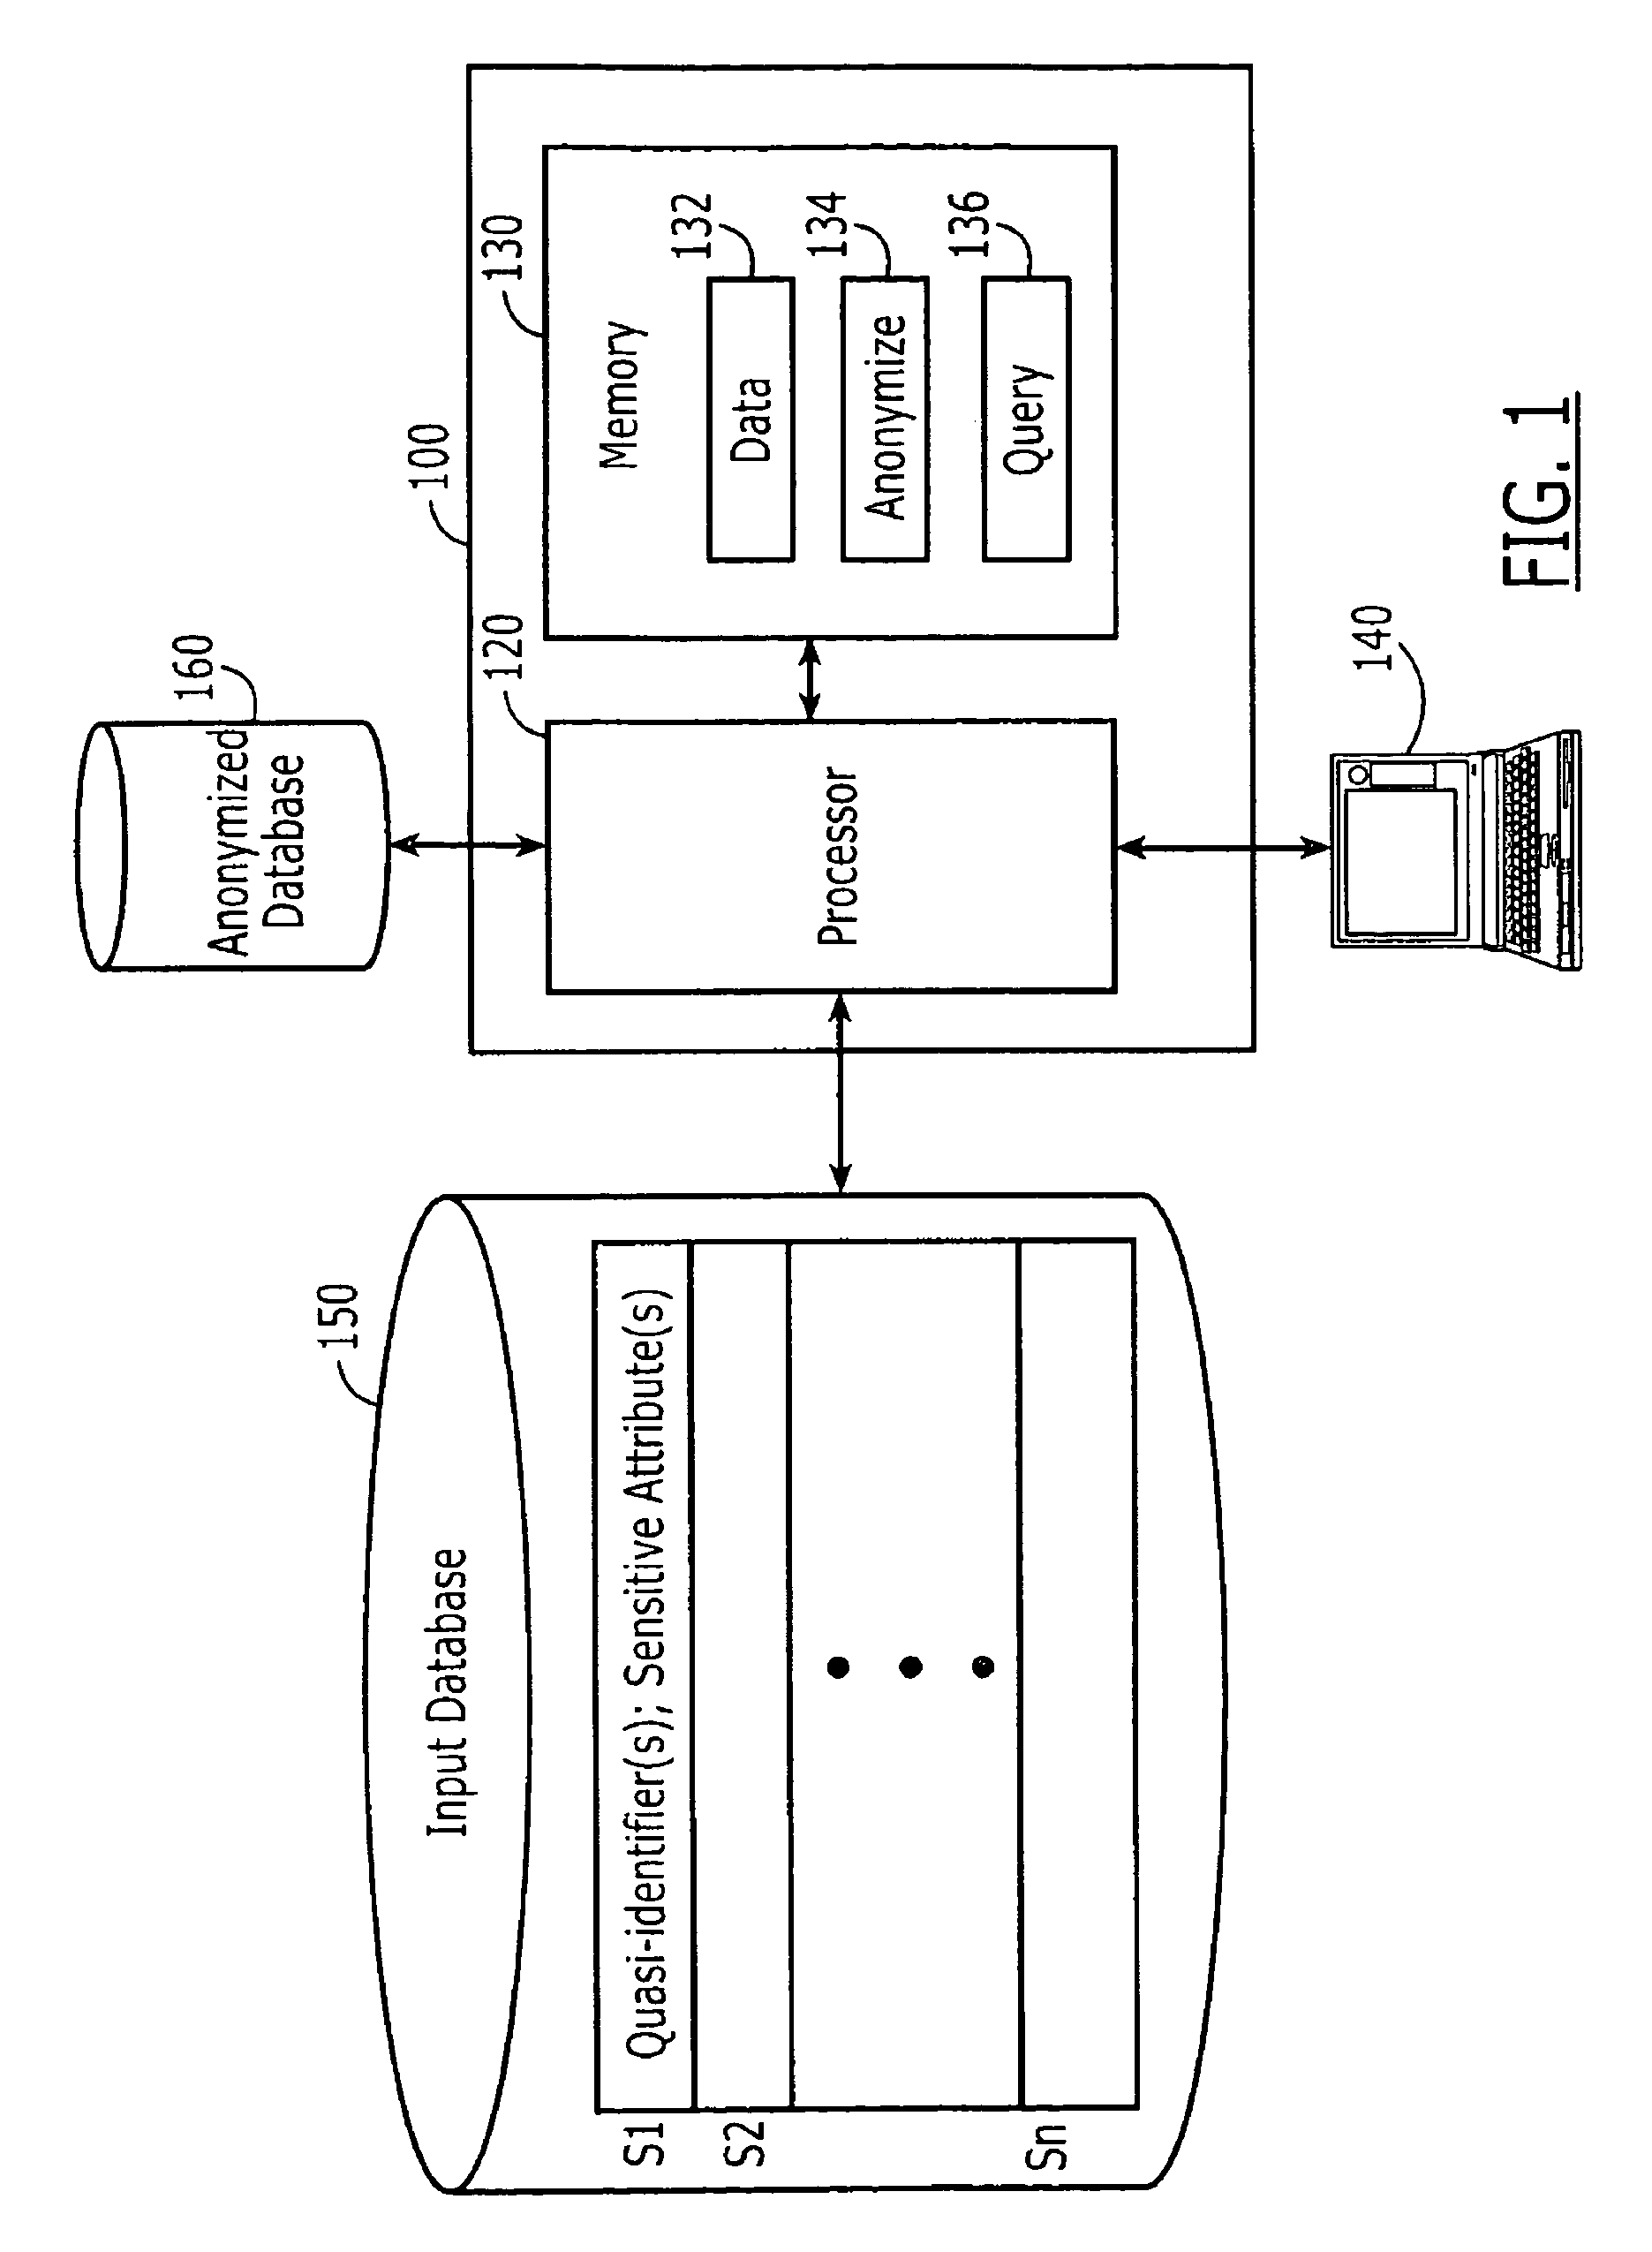 Computer systems, methods and computer program products for data anonymization for aggregate query answering